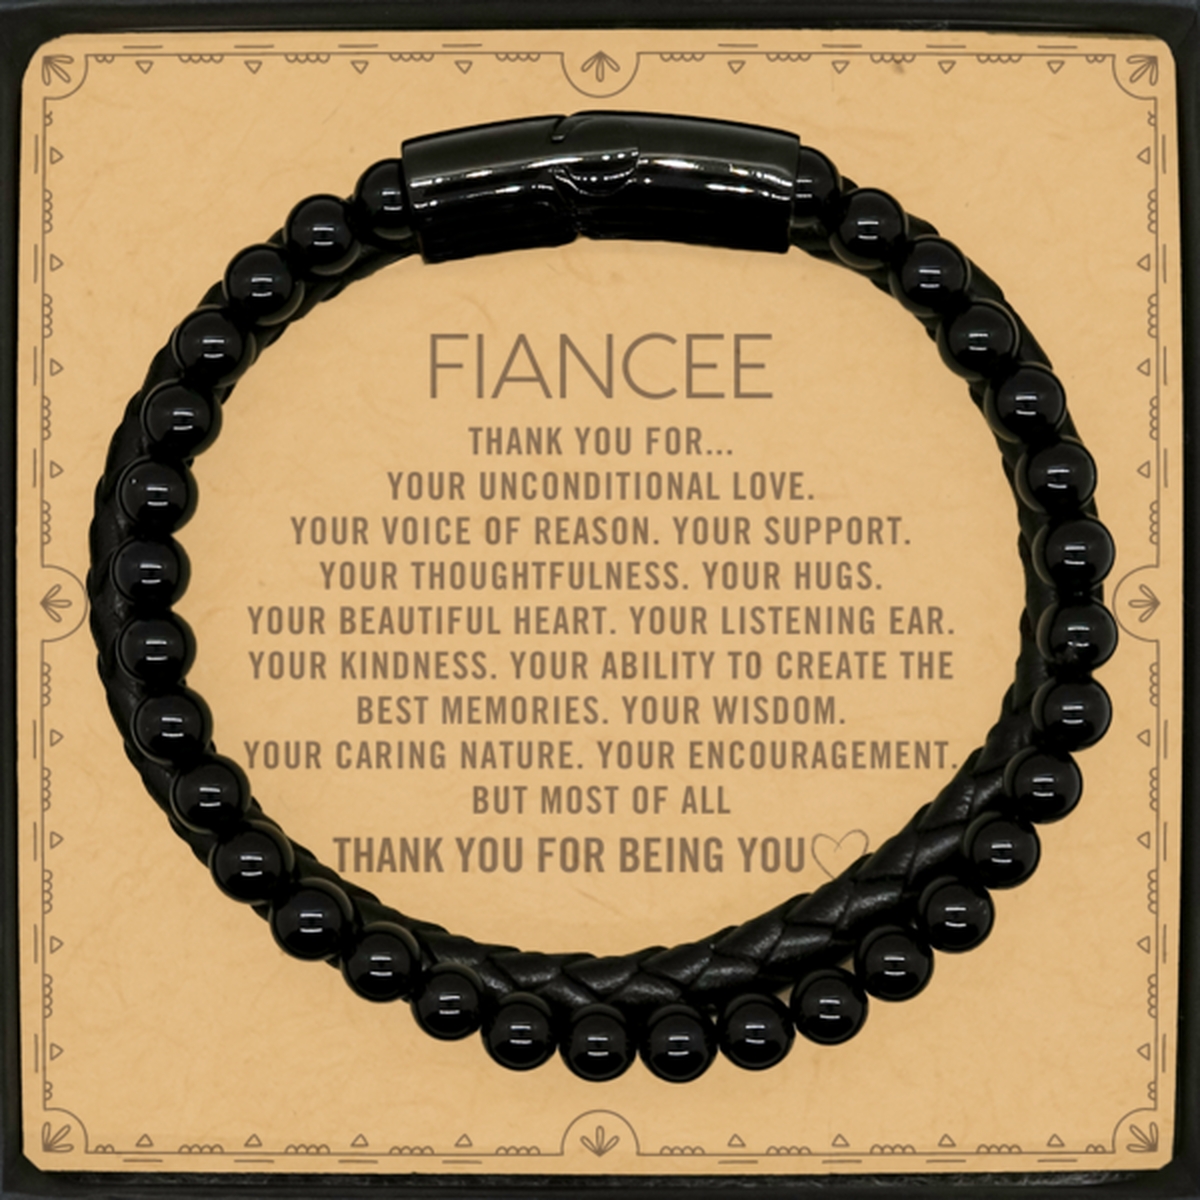 Fiancee Stone Leather Bracelets Custom, Message Card Gifts For Fiancee Christmas Graduation Birthday Gifts for Men Women Fiancee Thank you for Your unconditional love